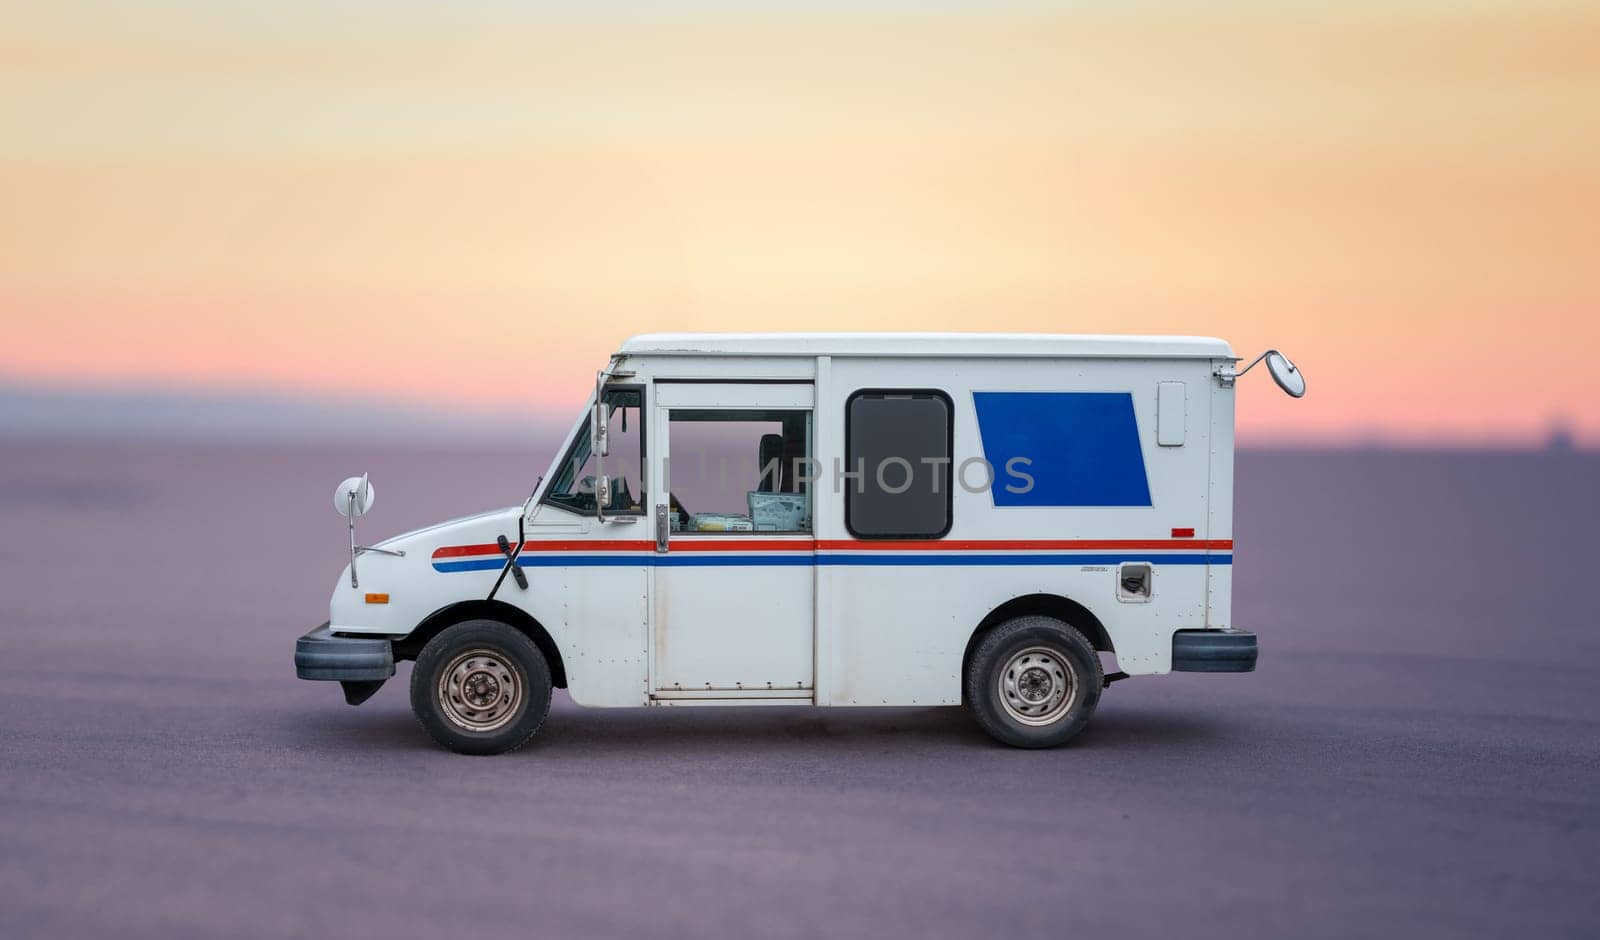 A Mail Delivery Truck In A Remote US Desert Wilderness